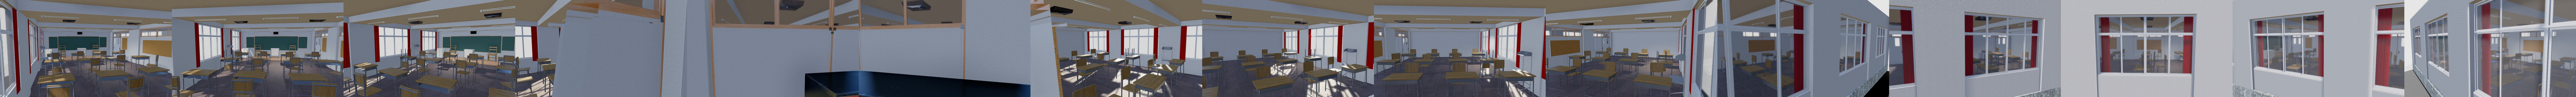 College - A 3D model collection by JuanKoss - Sketchfab